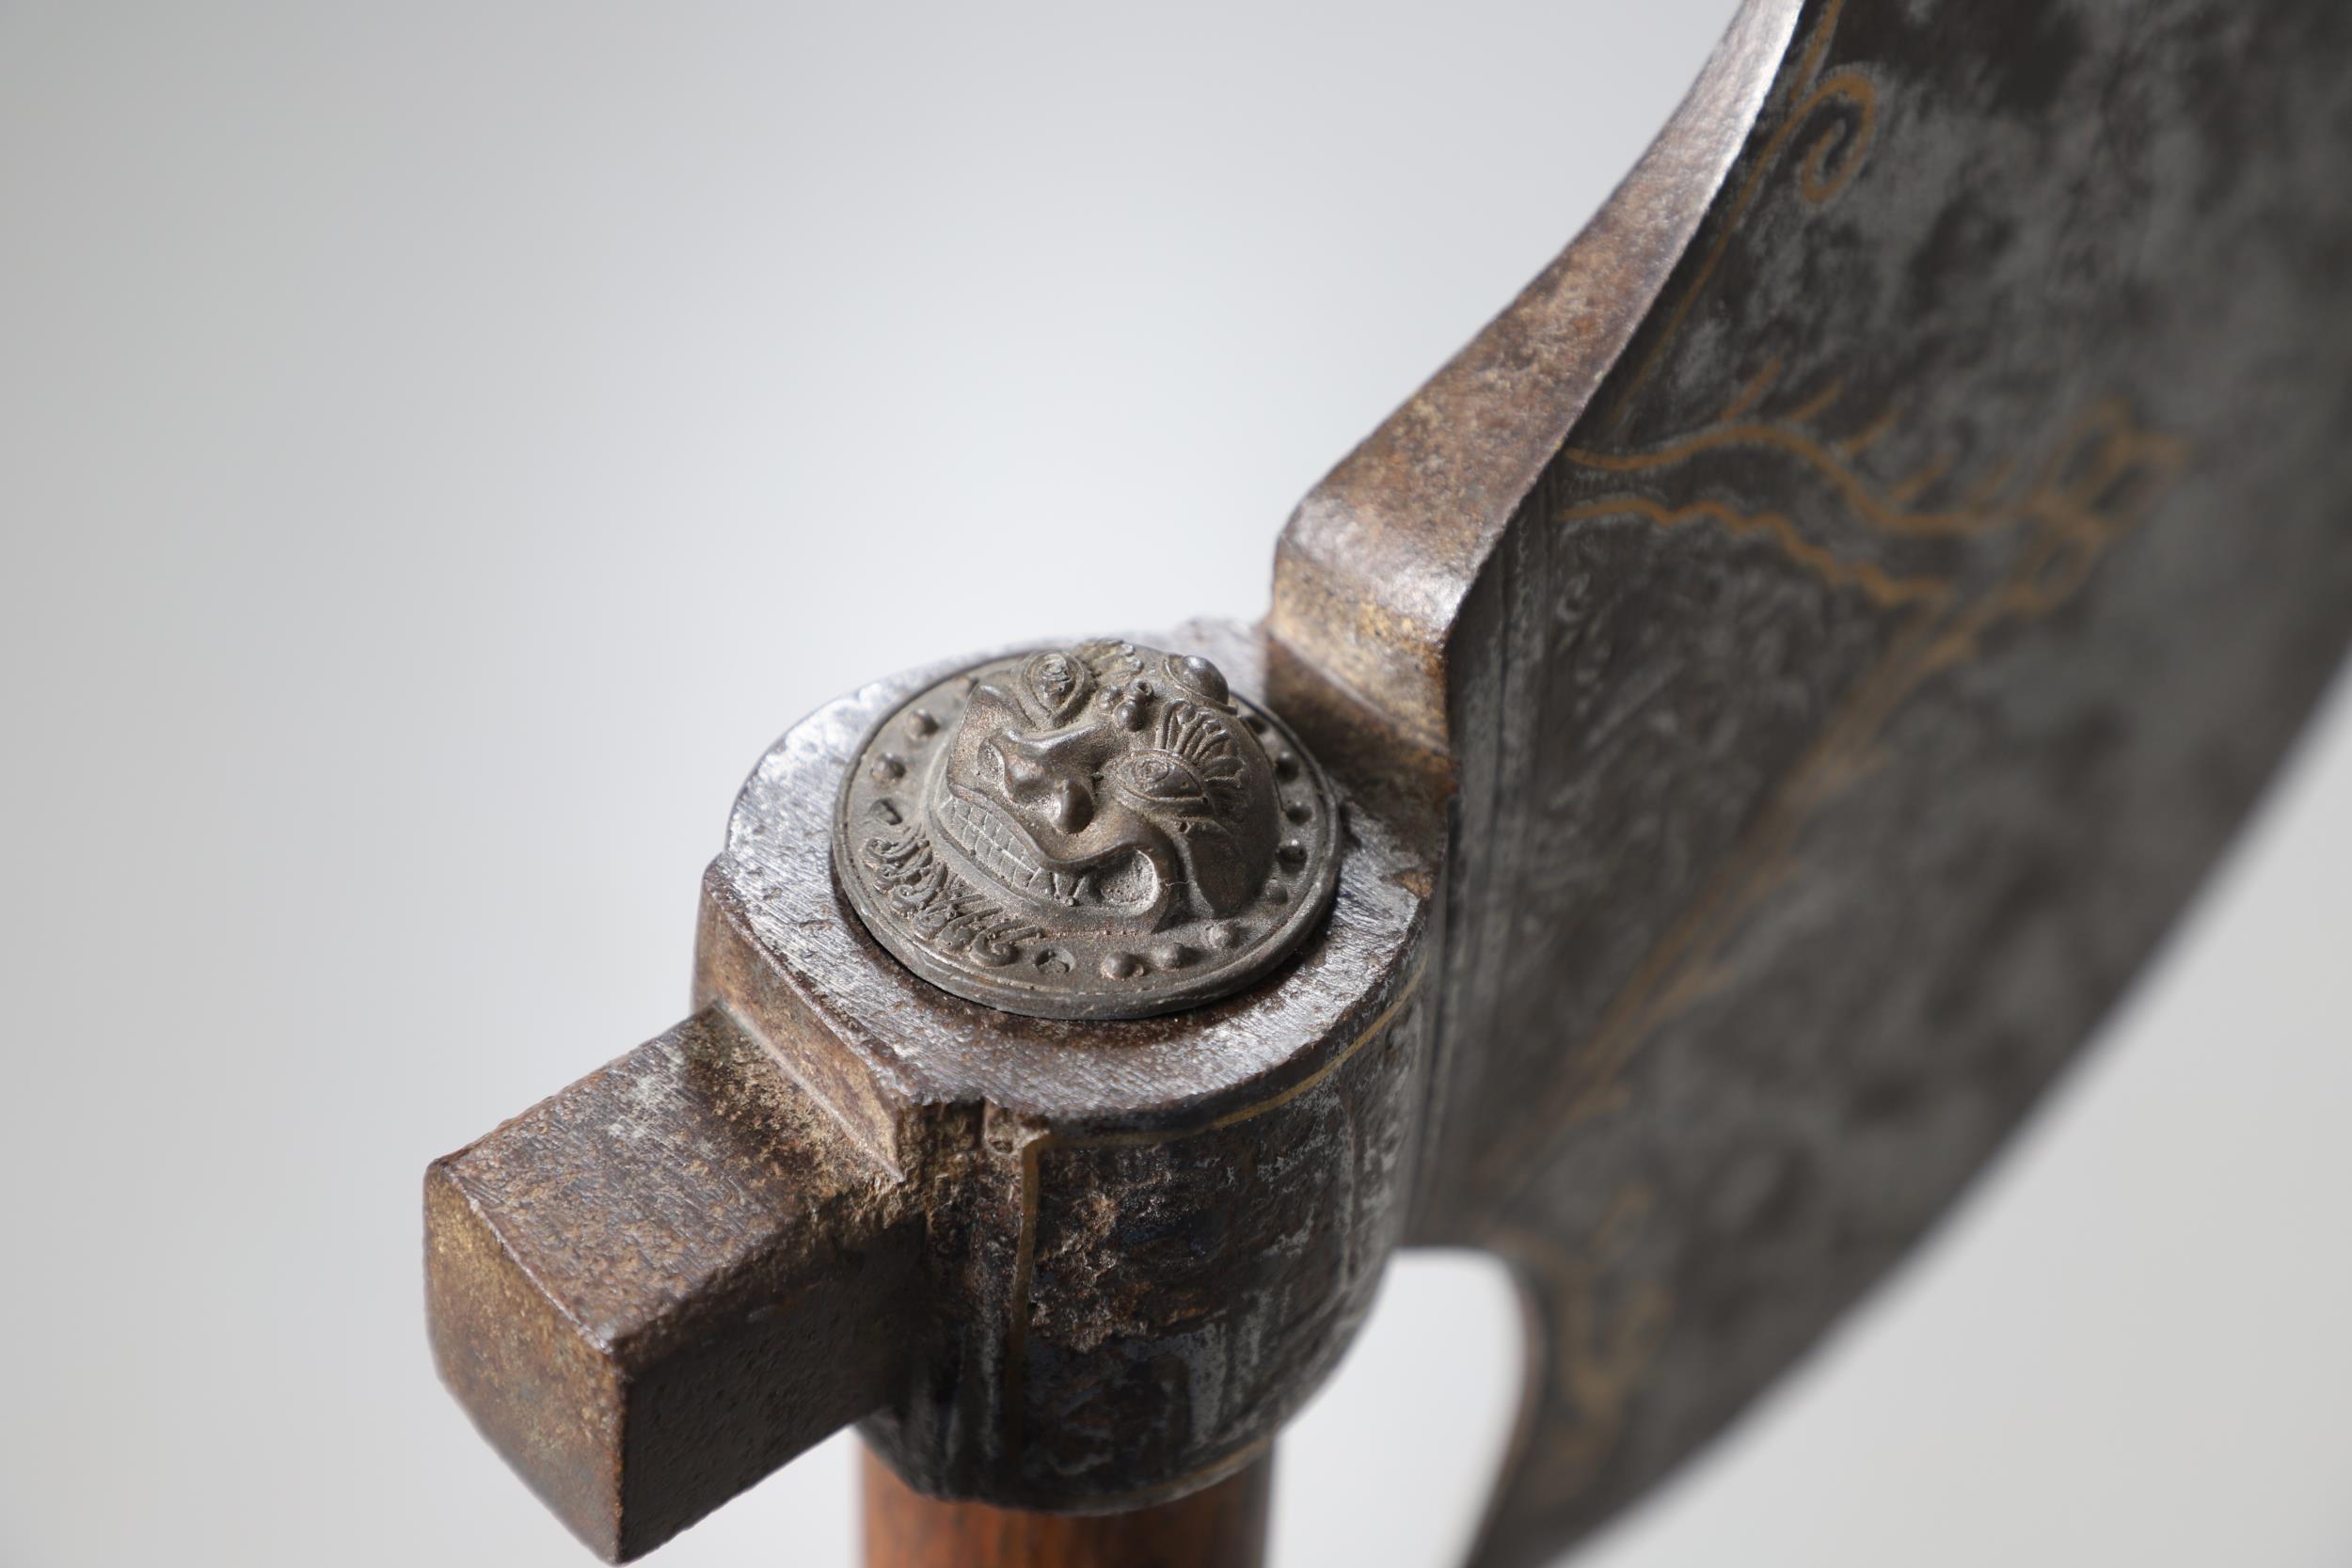 A SUBSTANTIAL PERSIAN OR OTTOMAN TWO HANDLED AXE. - Image 11 of 11